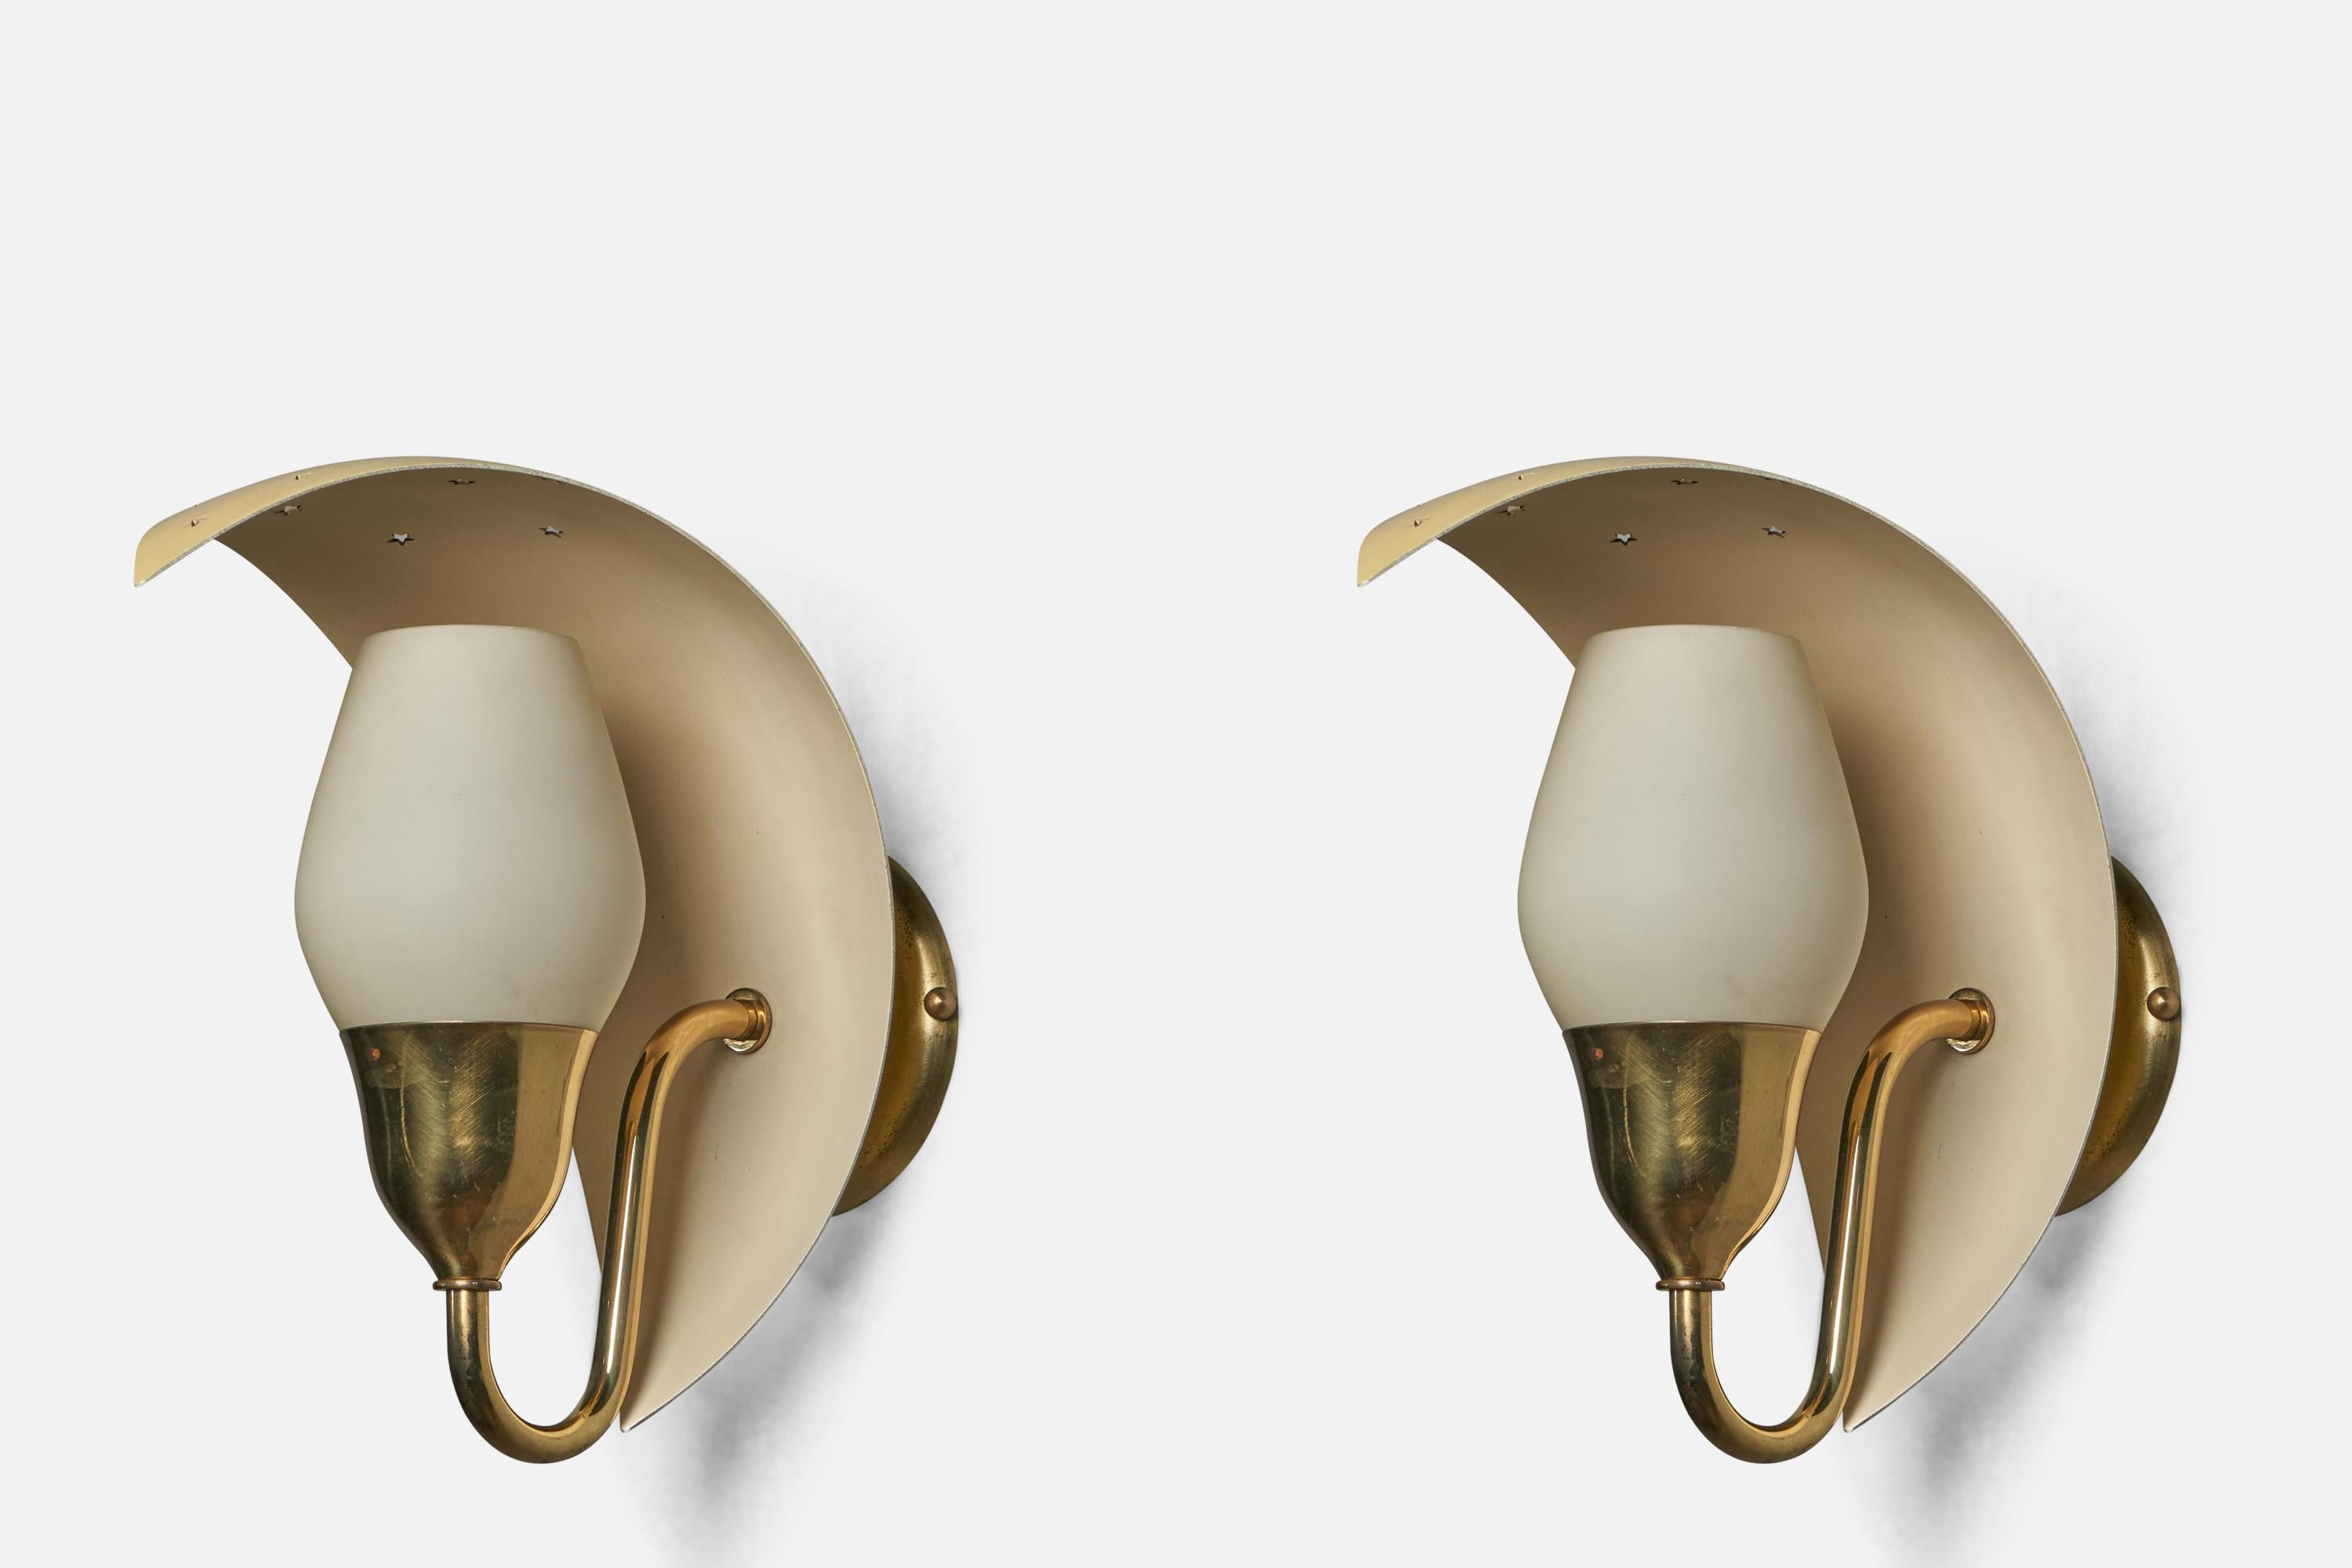 A pair of brass, yellow beige lacquered metal and opaline glass wall lights designed by Bent Karlby and produced by Lyfa, Denmark, 1960s.

Overall Dimensions (inches): 9.25” H x 5.25” W x 8.75” D
Back Plate Dimensions (inches): 3.75” Diameter x